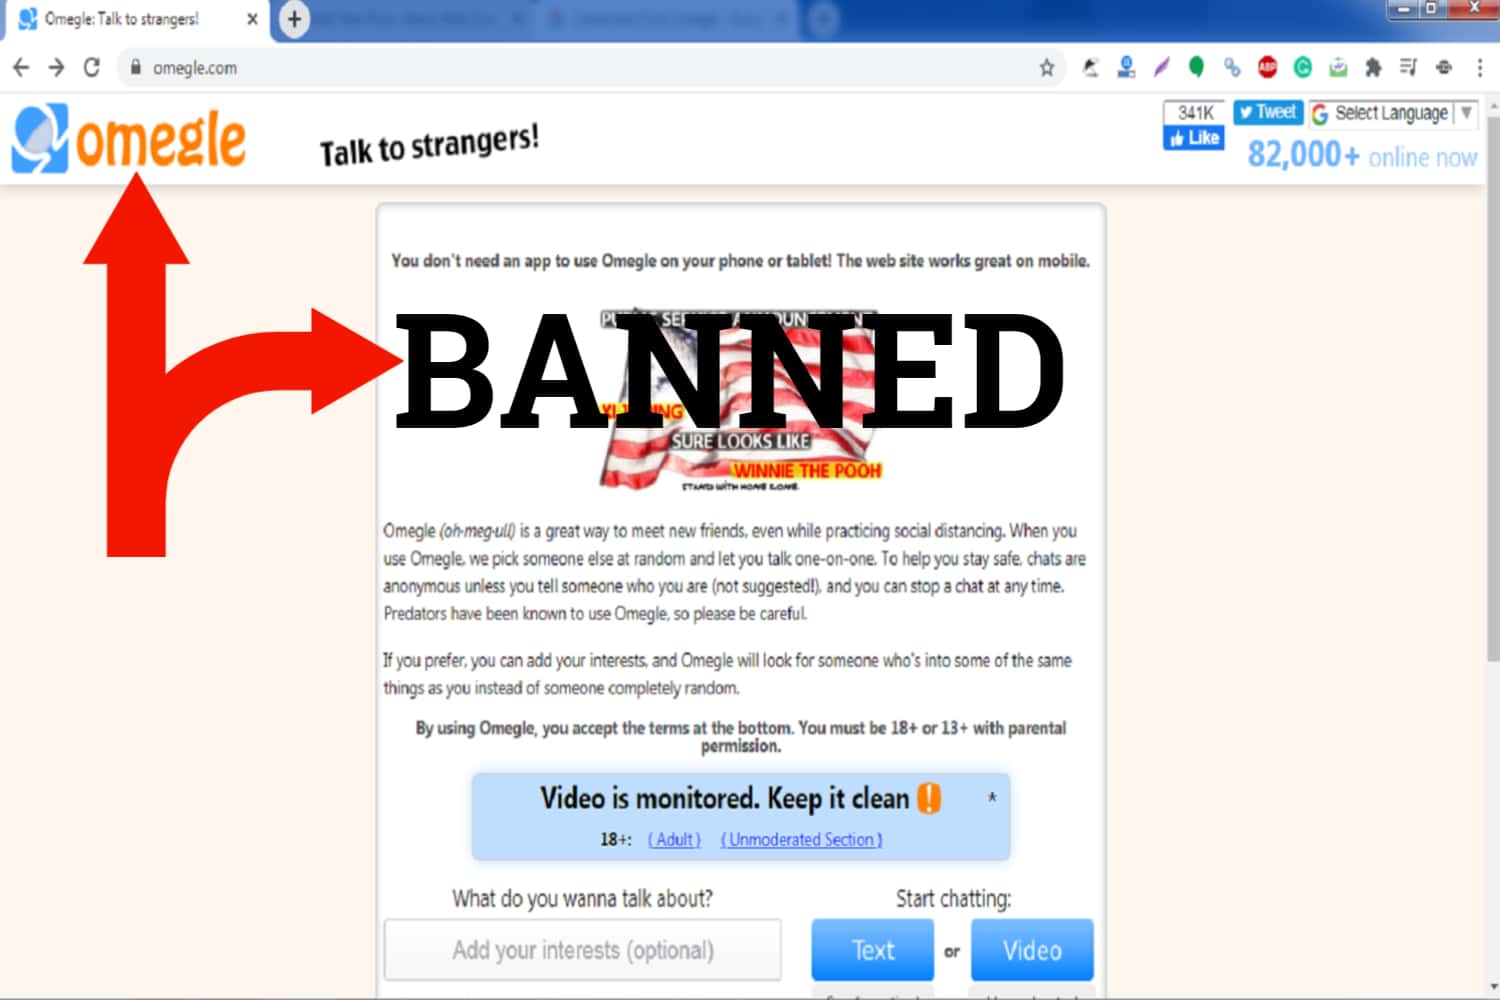 How To Get Unbanned From Omegle